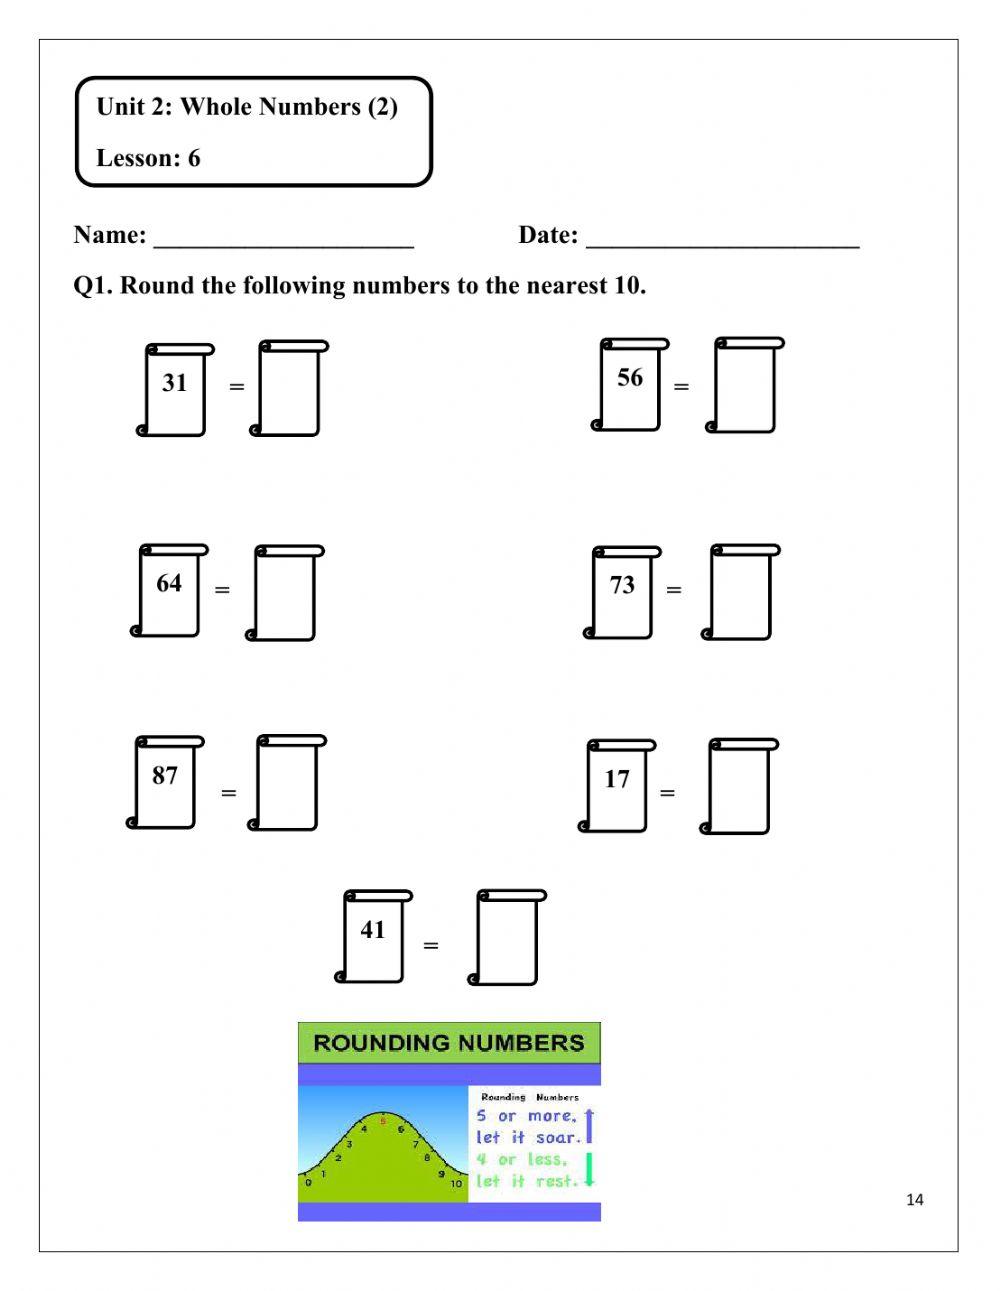 Unit 2 lesson 5 and 6